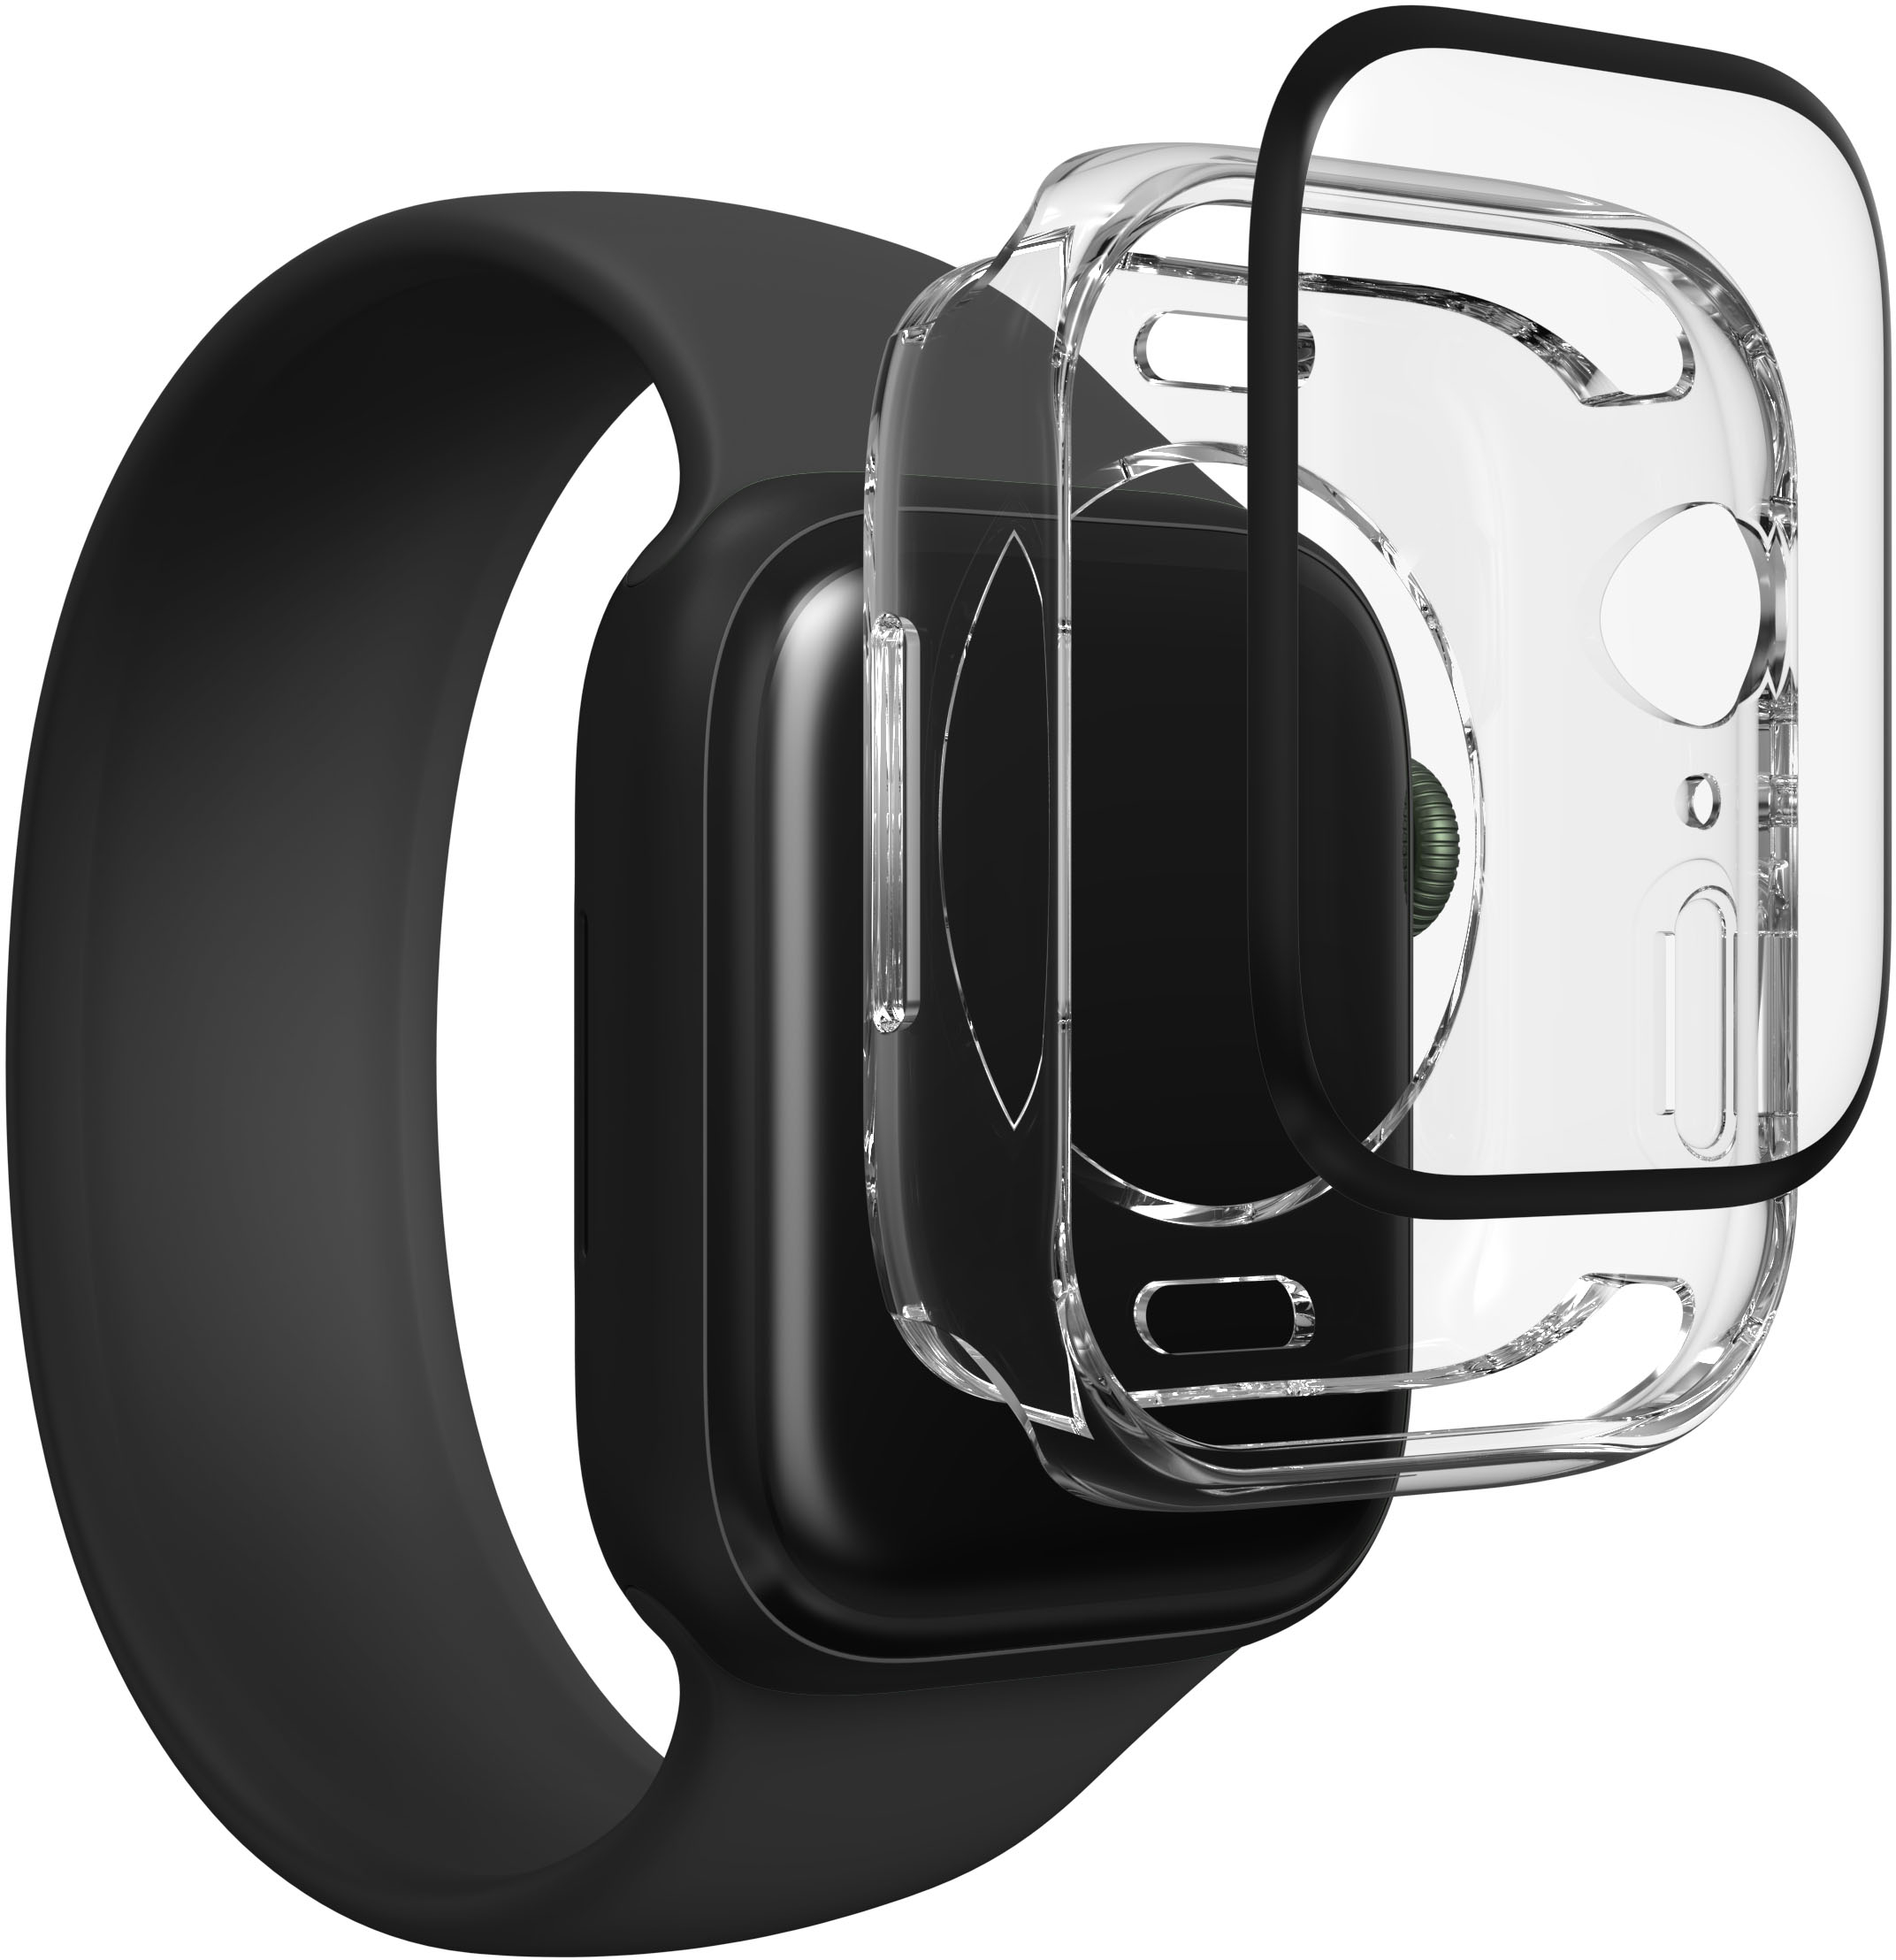 

ZAGG - InvisibleShield GlassFusion+ 360 Flexible Hybrid Screen Protector + Bumper for Apple Watch Series 7 and 8 41mm - Clear